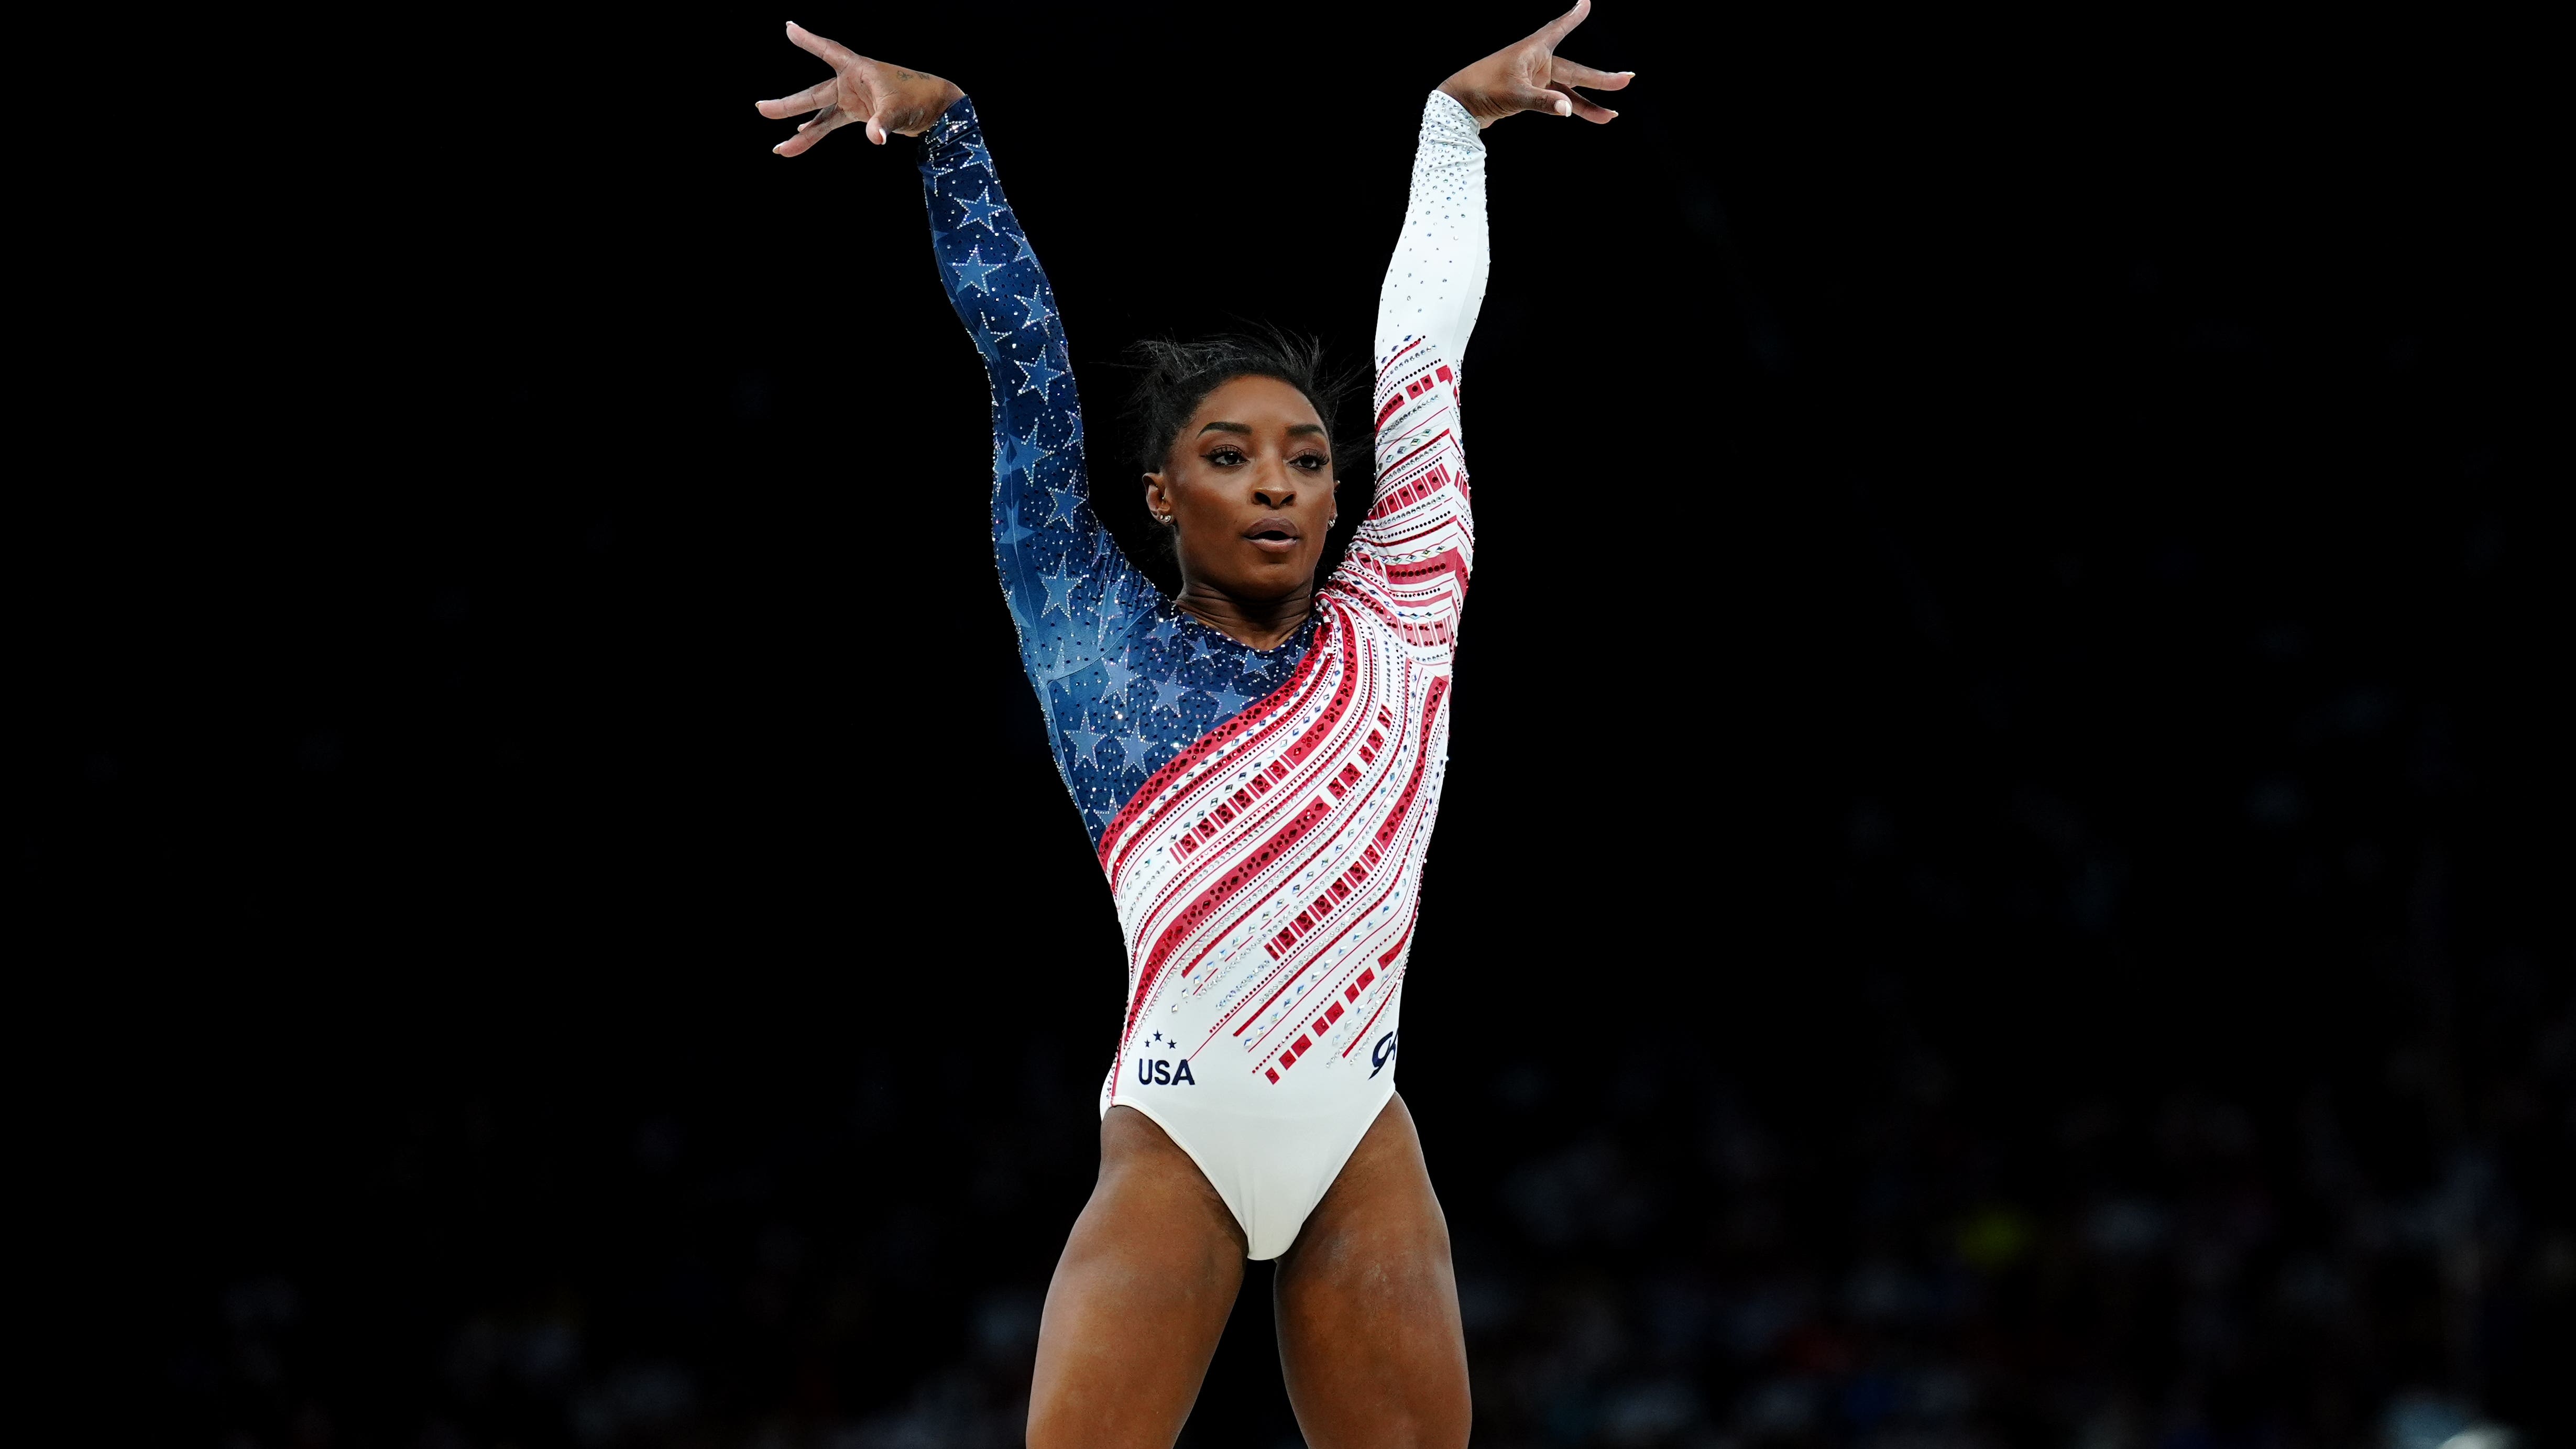 Gold for Simone Biles and Team USA as Great Britain just miss out on a medal